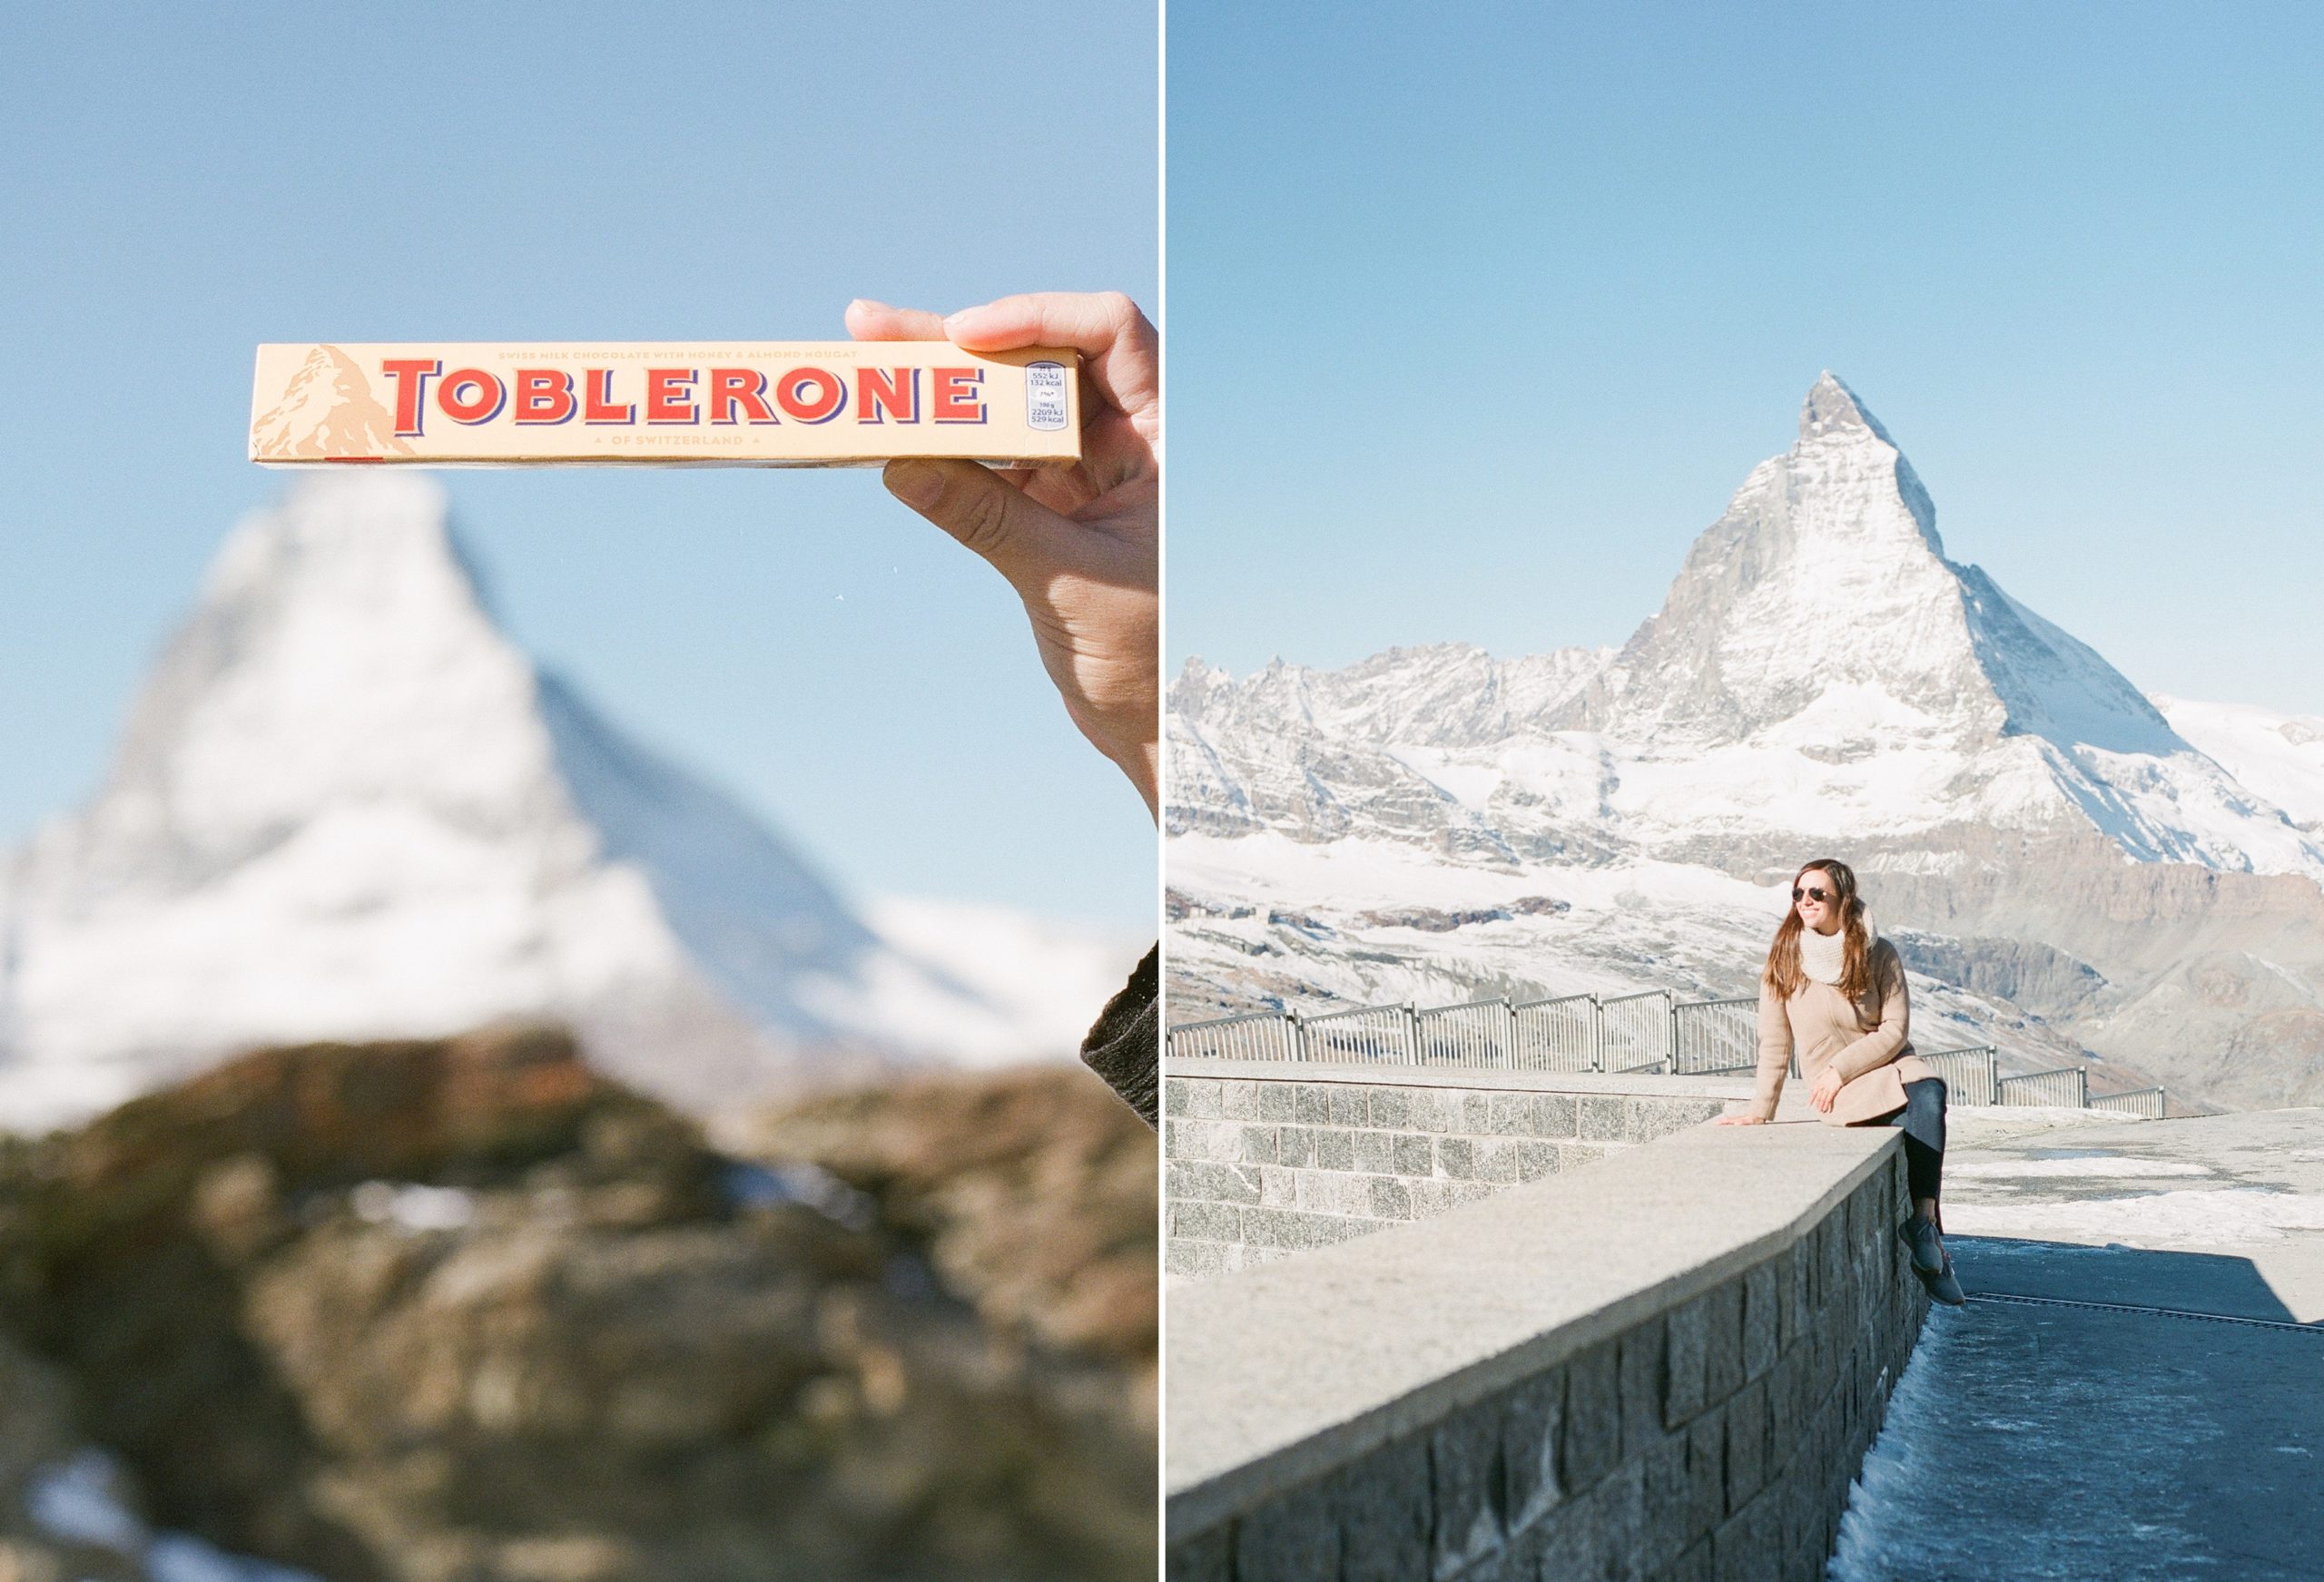 Washington, DC wedding photographer, Alicia Lacey, shares photos of her travels to Alsace, France and Zermatt, Switzerland.